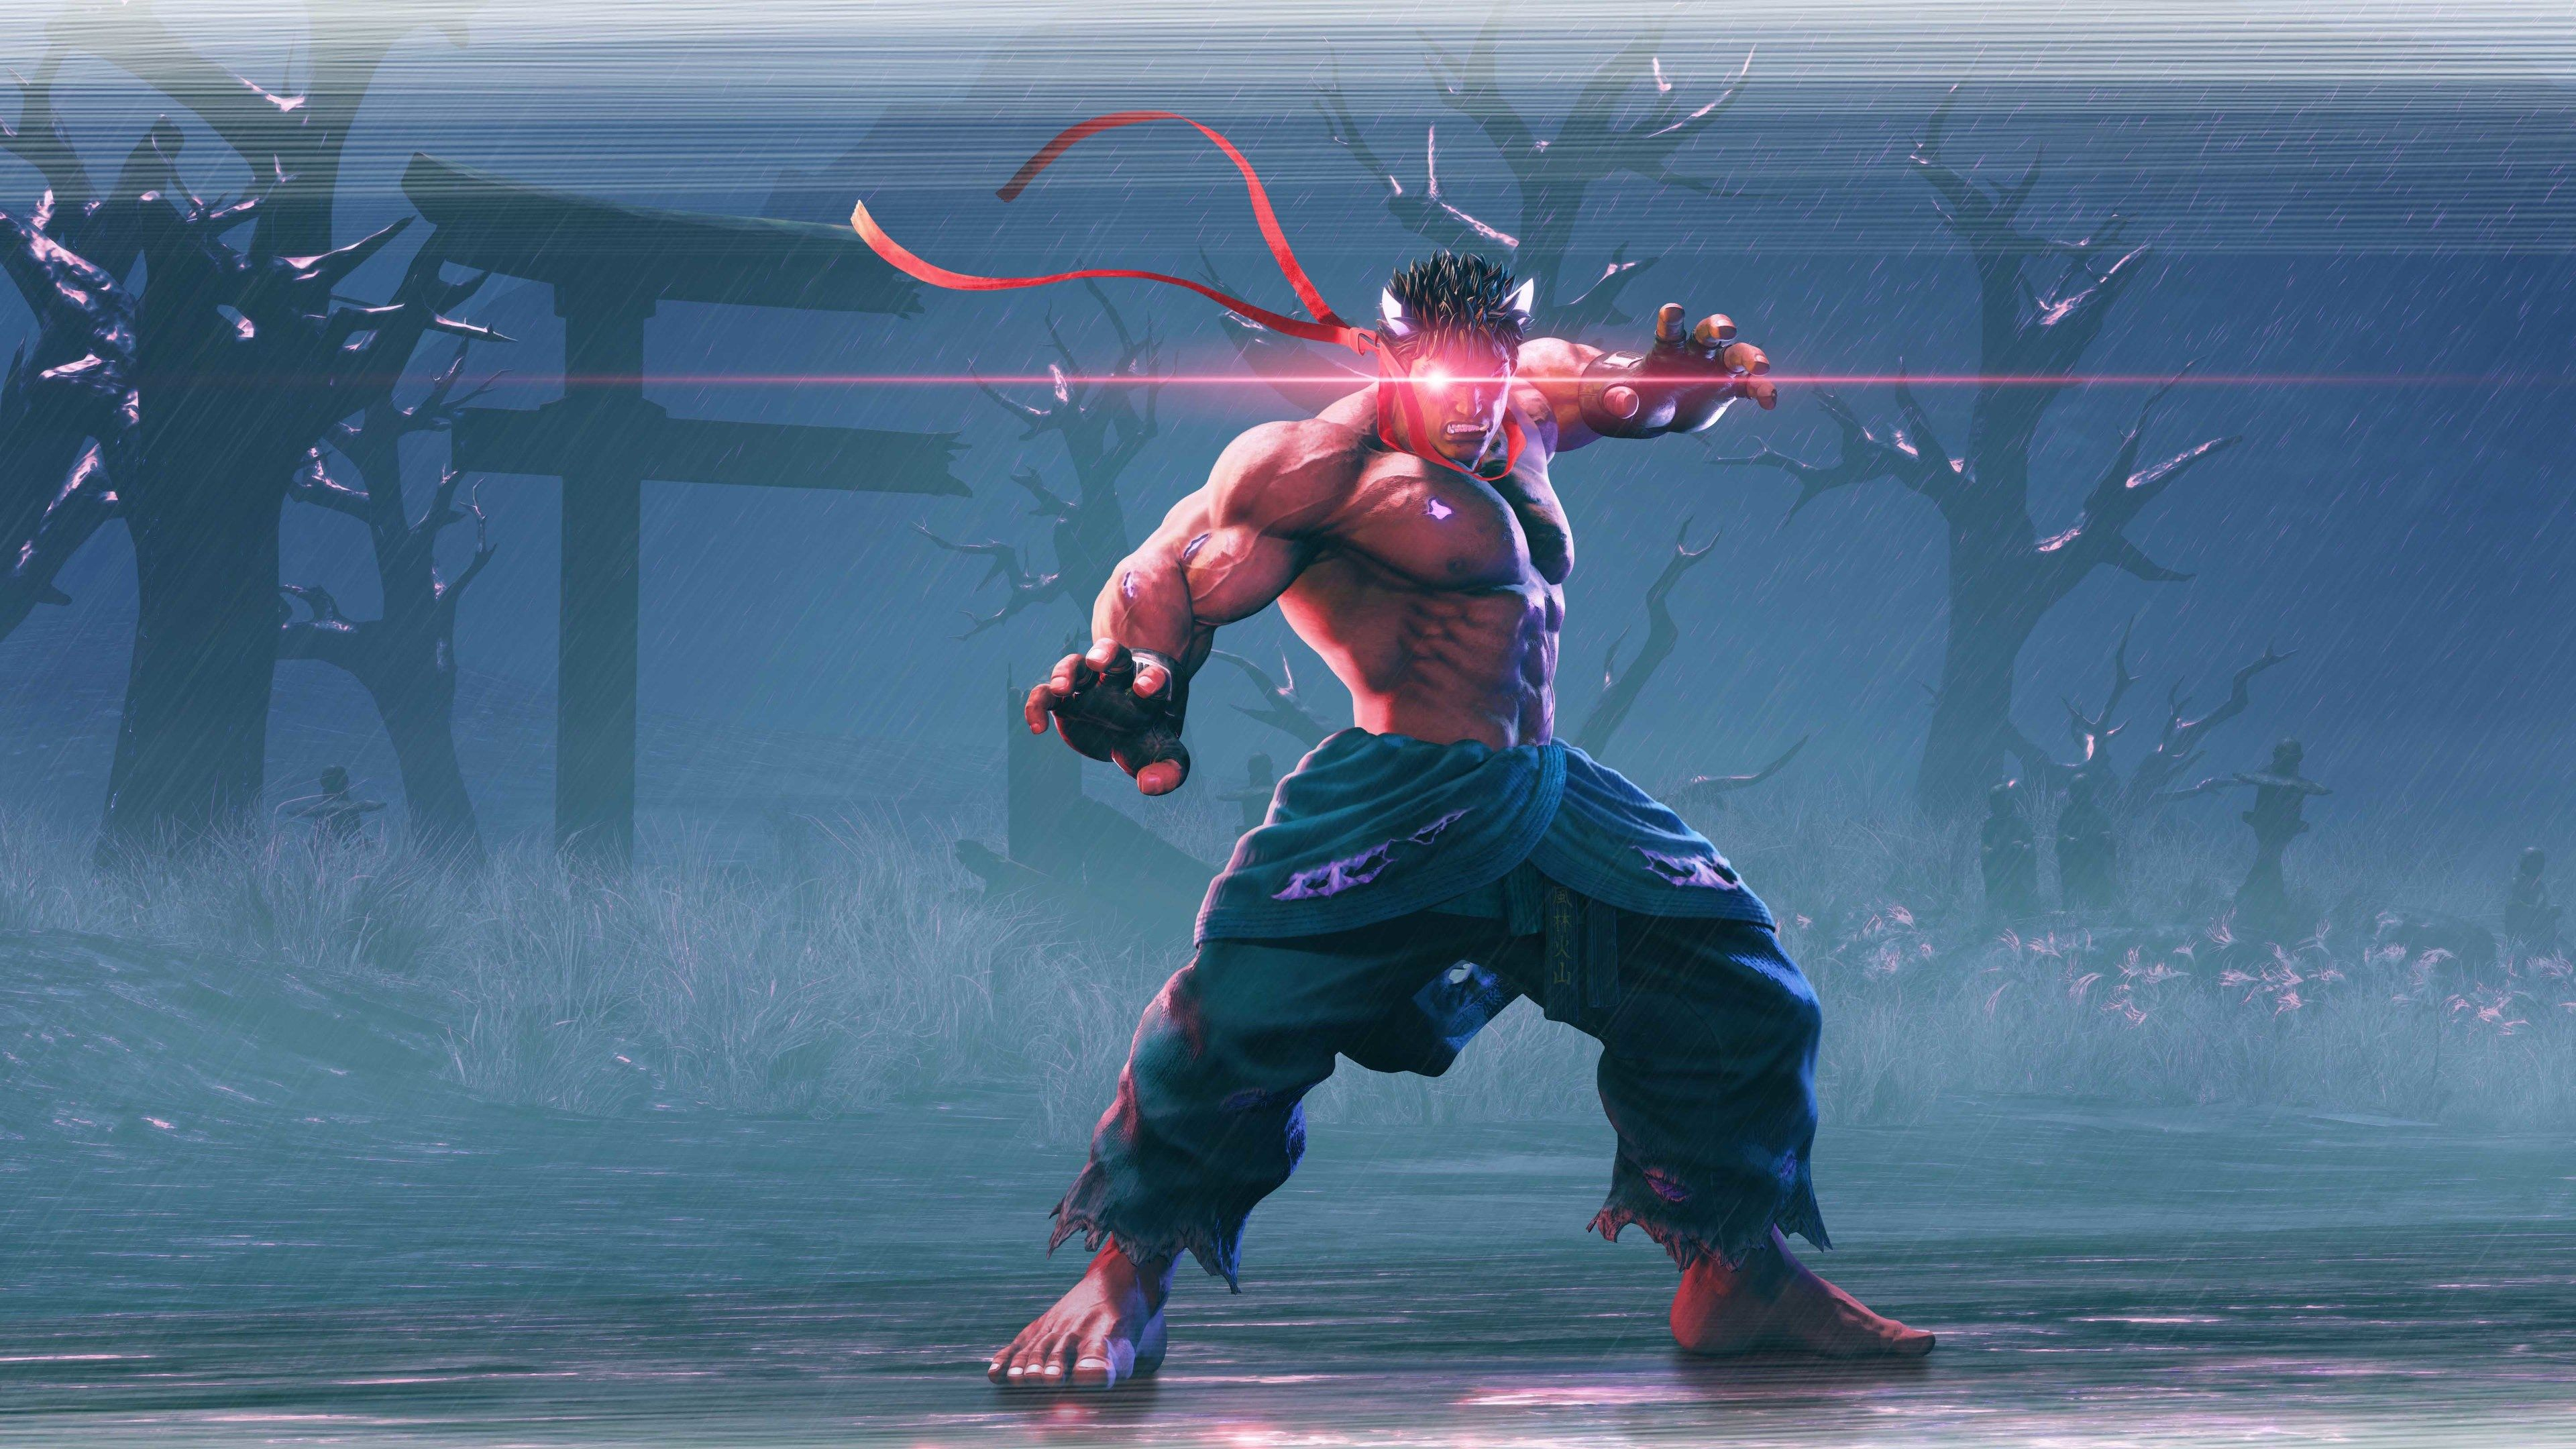 3840x2160 Street Fighter Wallpapers